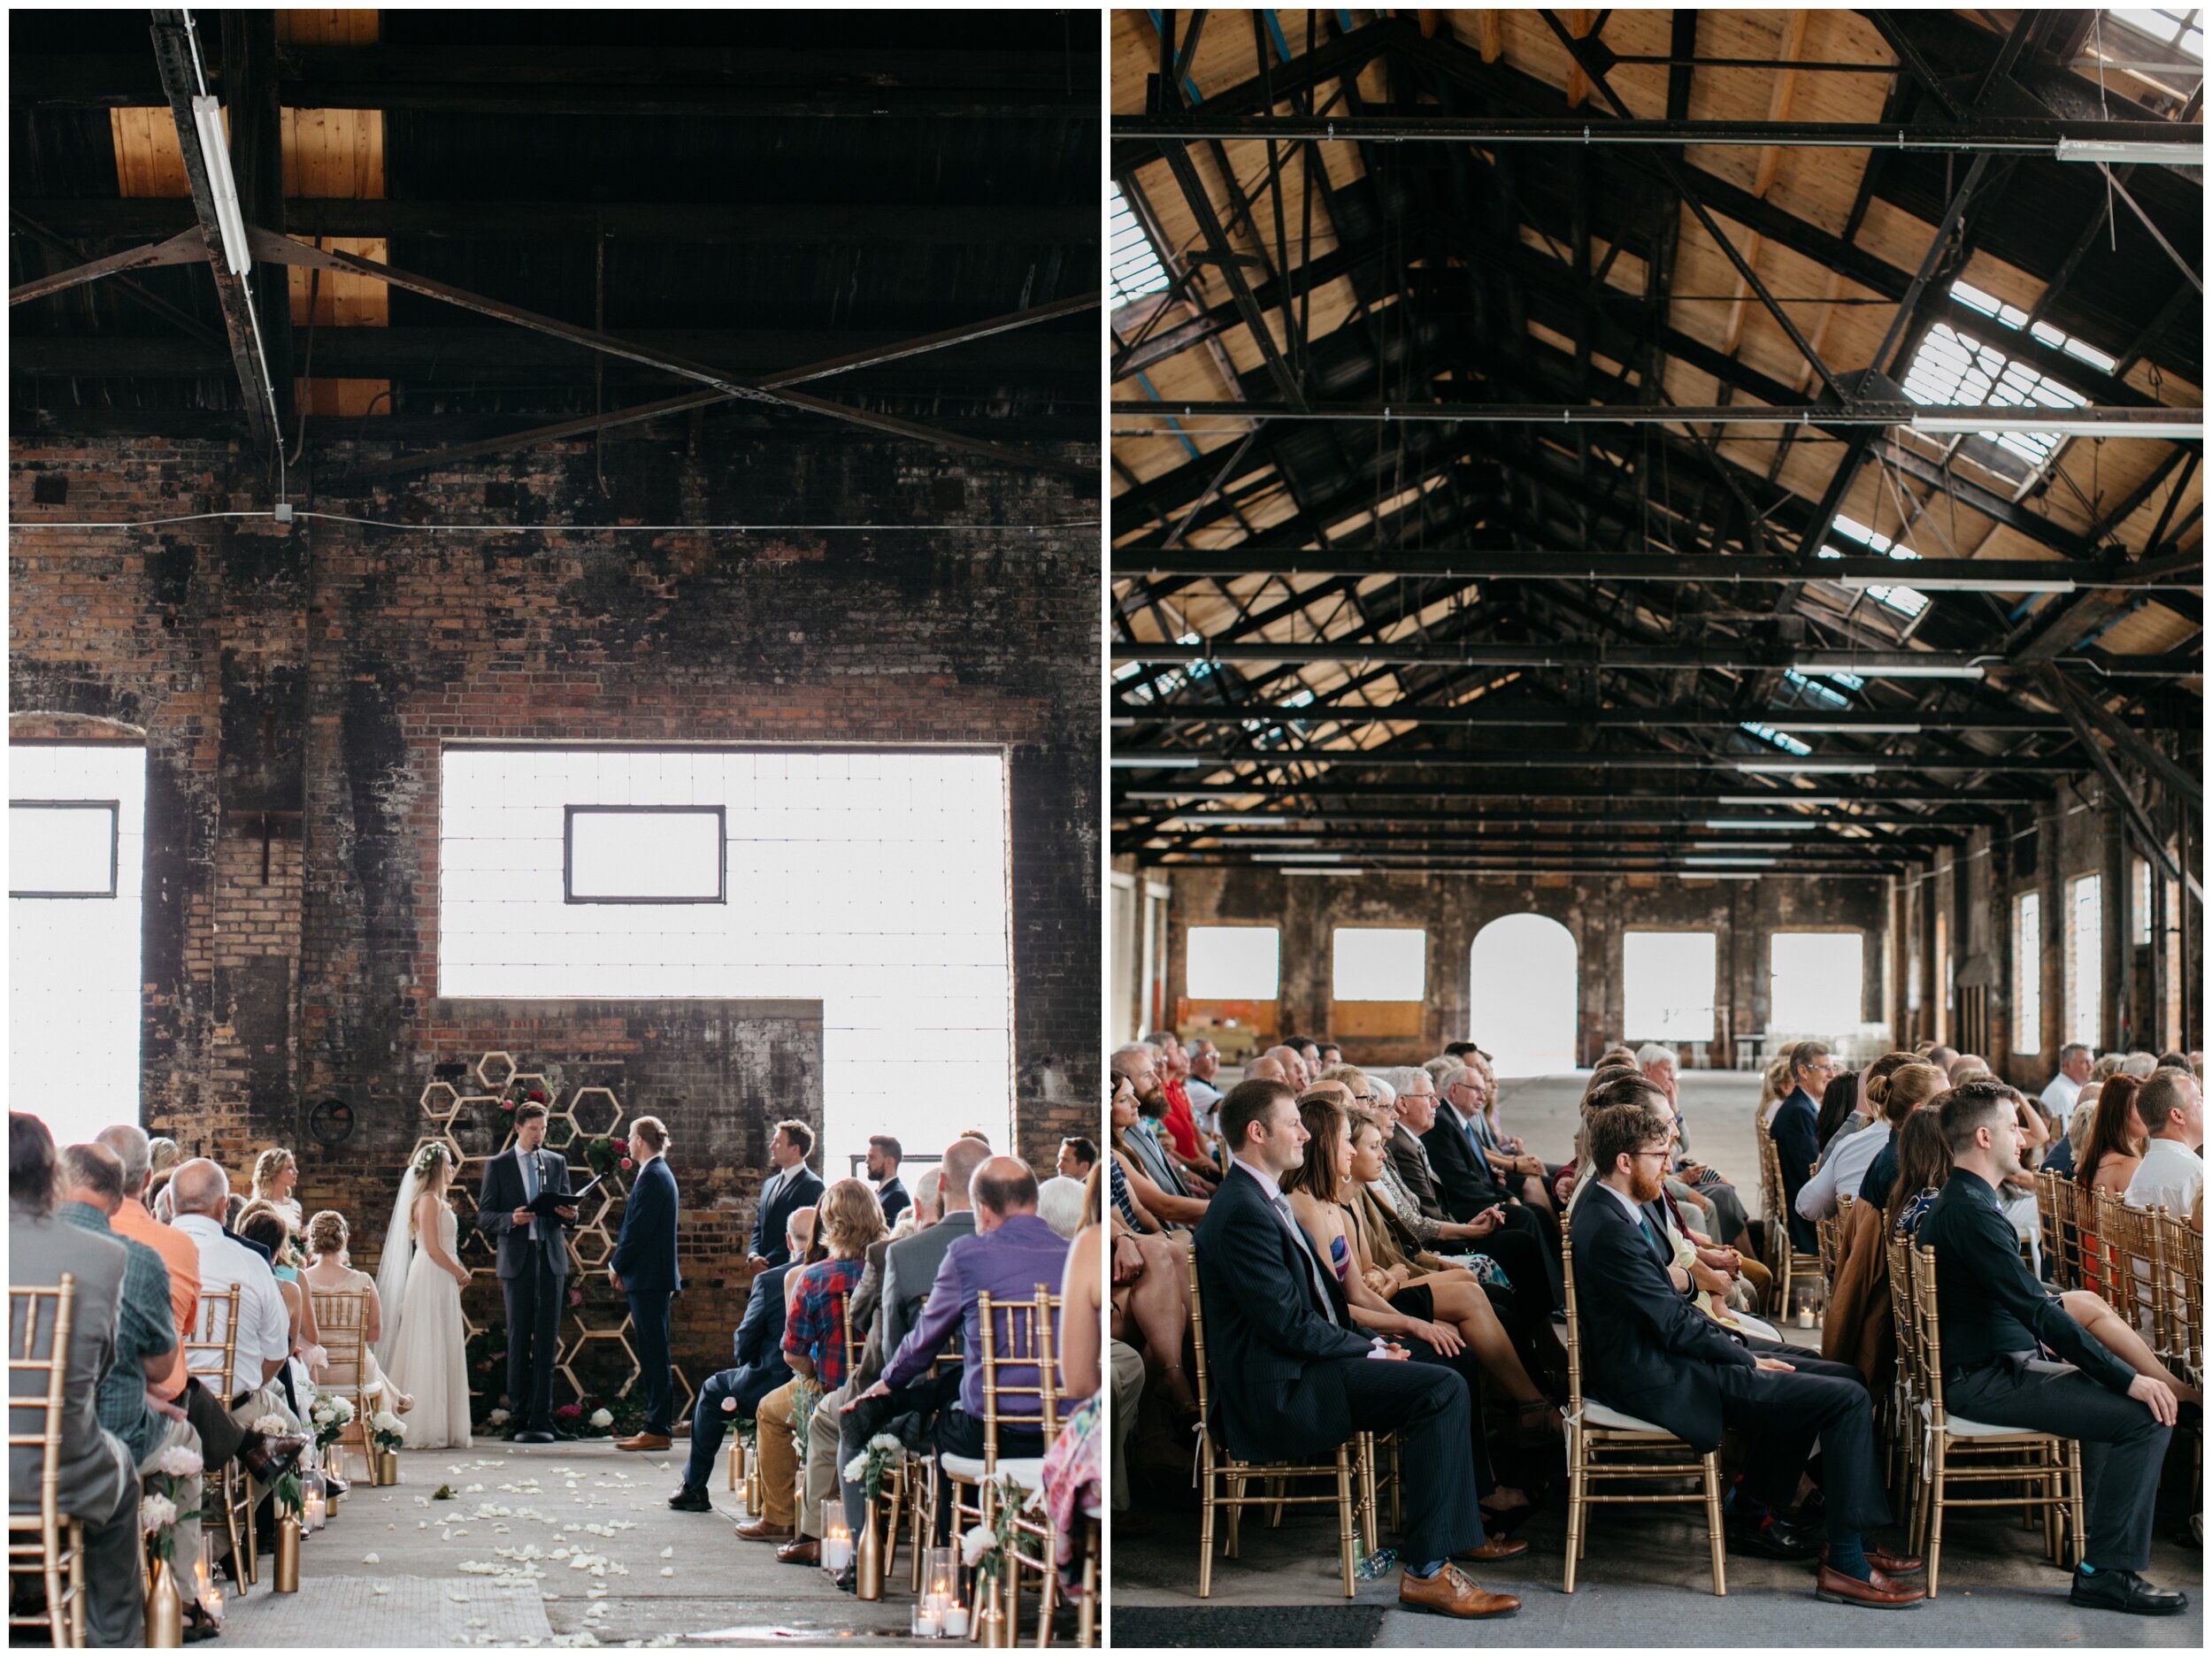 Romantic industrial wedding ceremony inside warehouse at the Northern Pacific Center in Brainerd, Minnesota